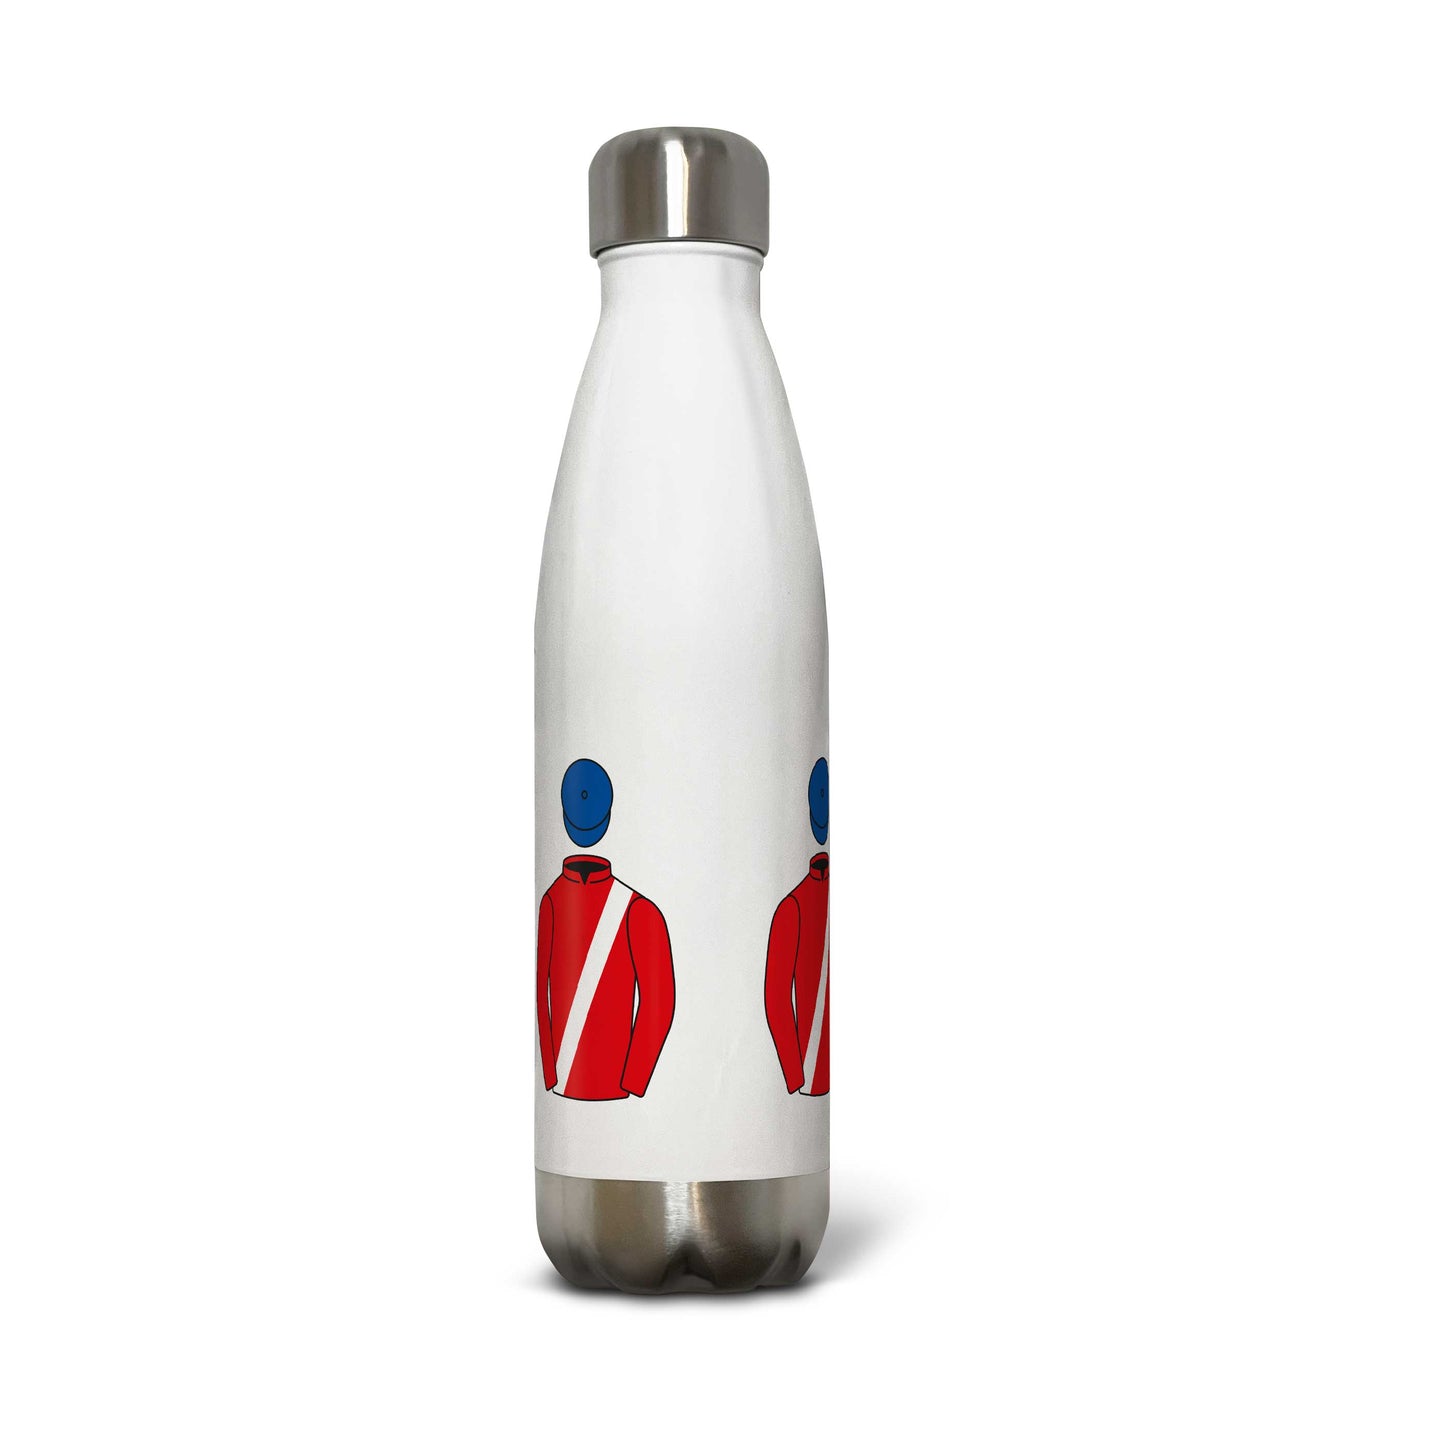 Cheveley Park Stud Bowling Pin Bottle - Drinks Bottle - Hacked Up